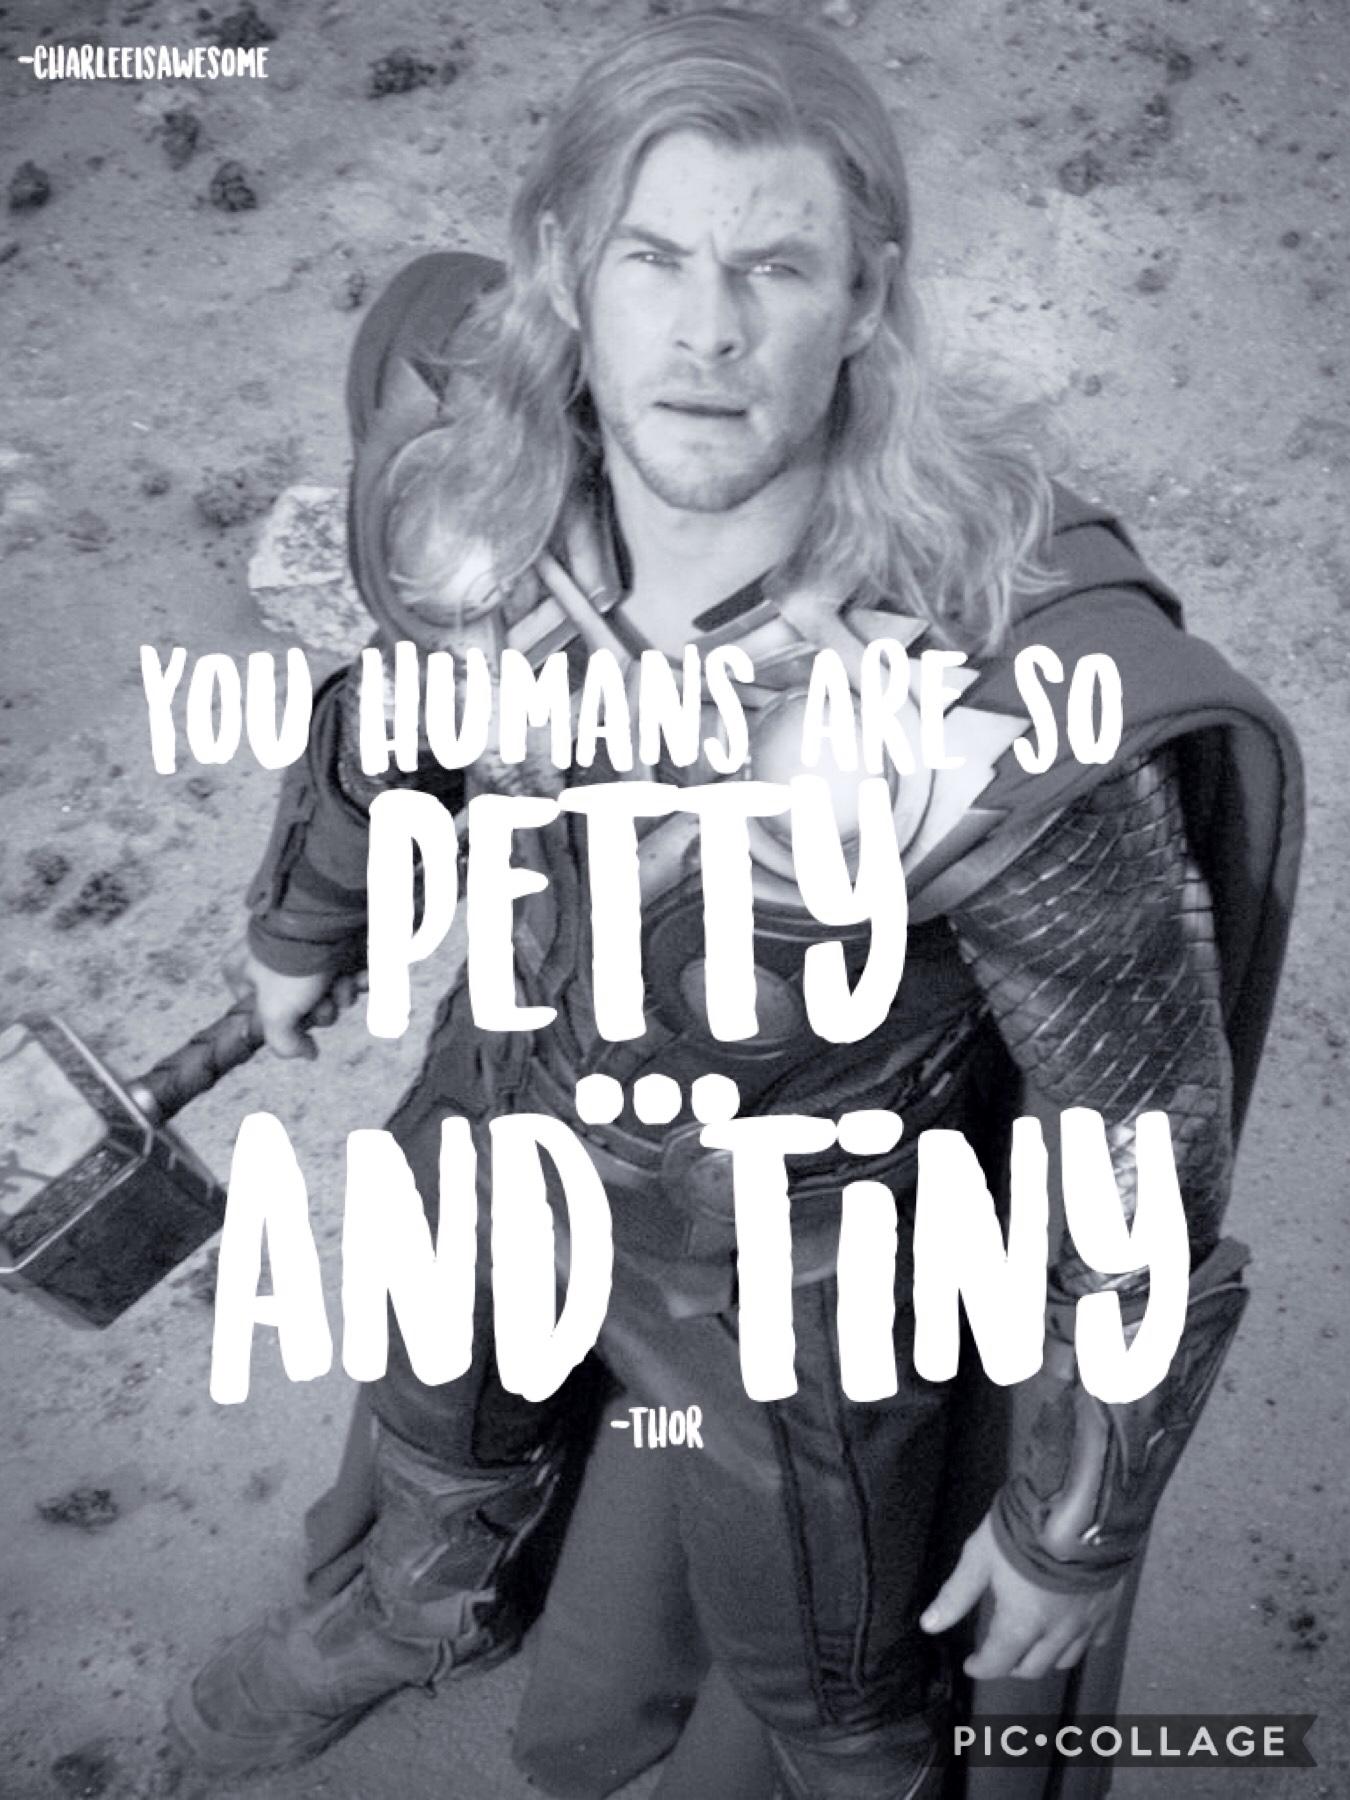 Thor quotes lol this quote is the funniest I could think of at the moment XD